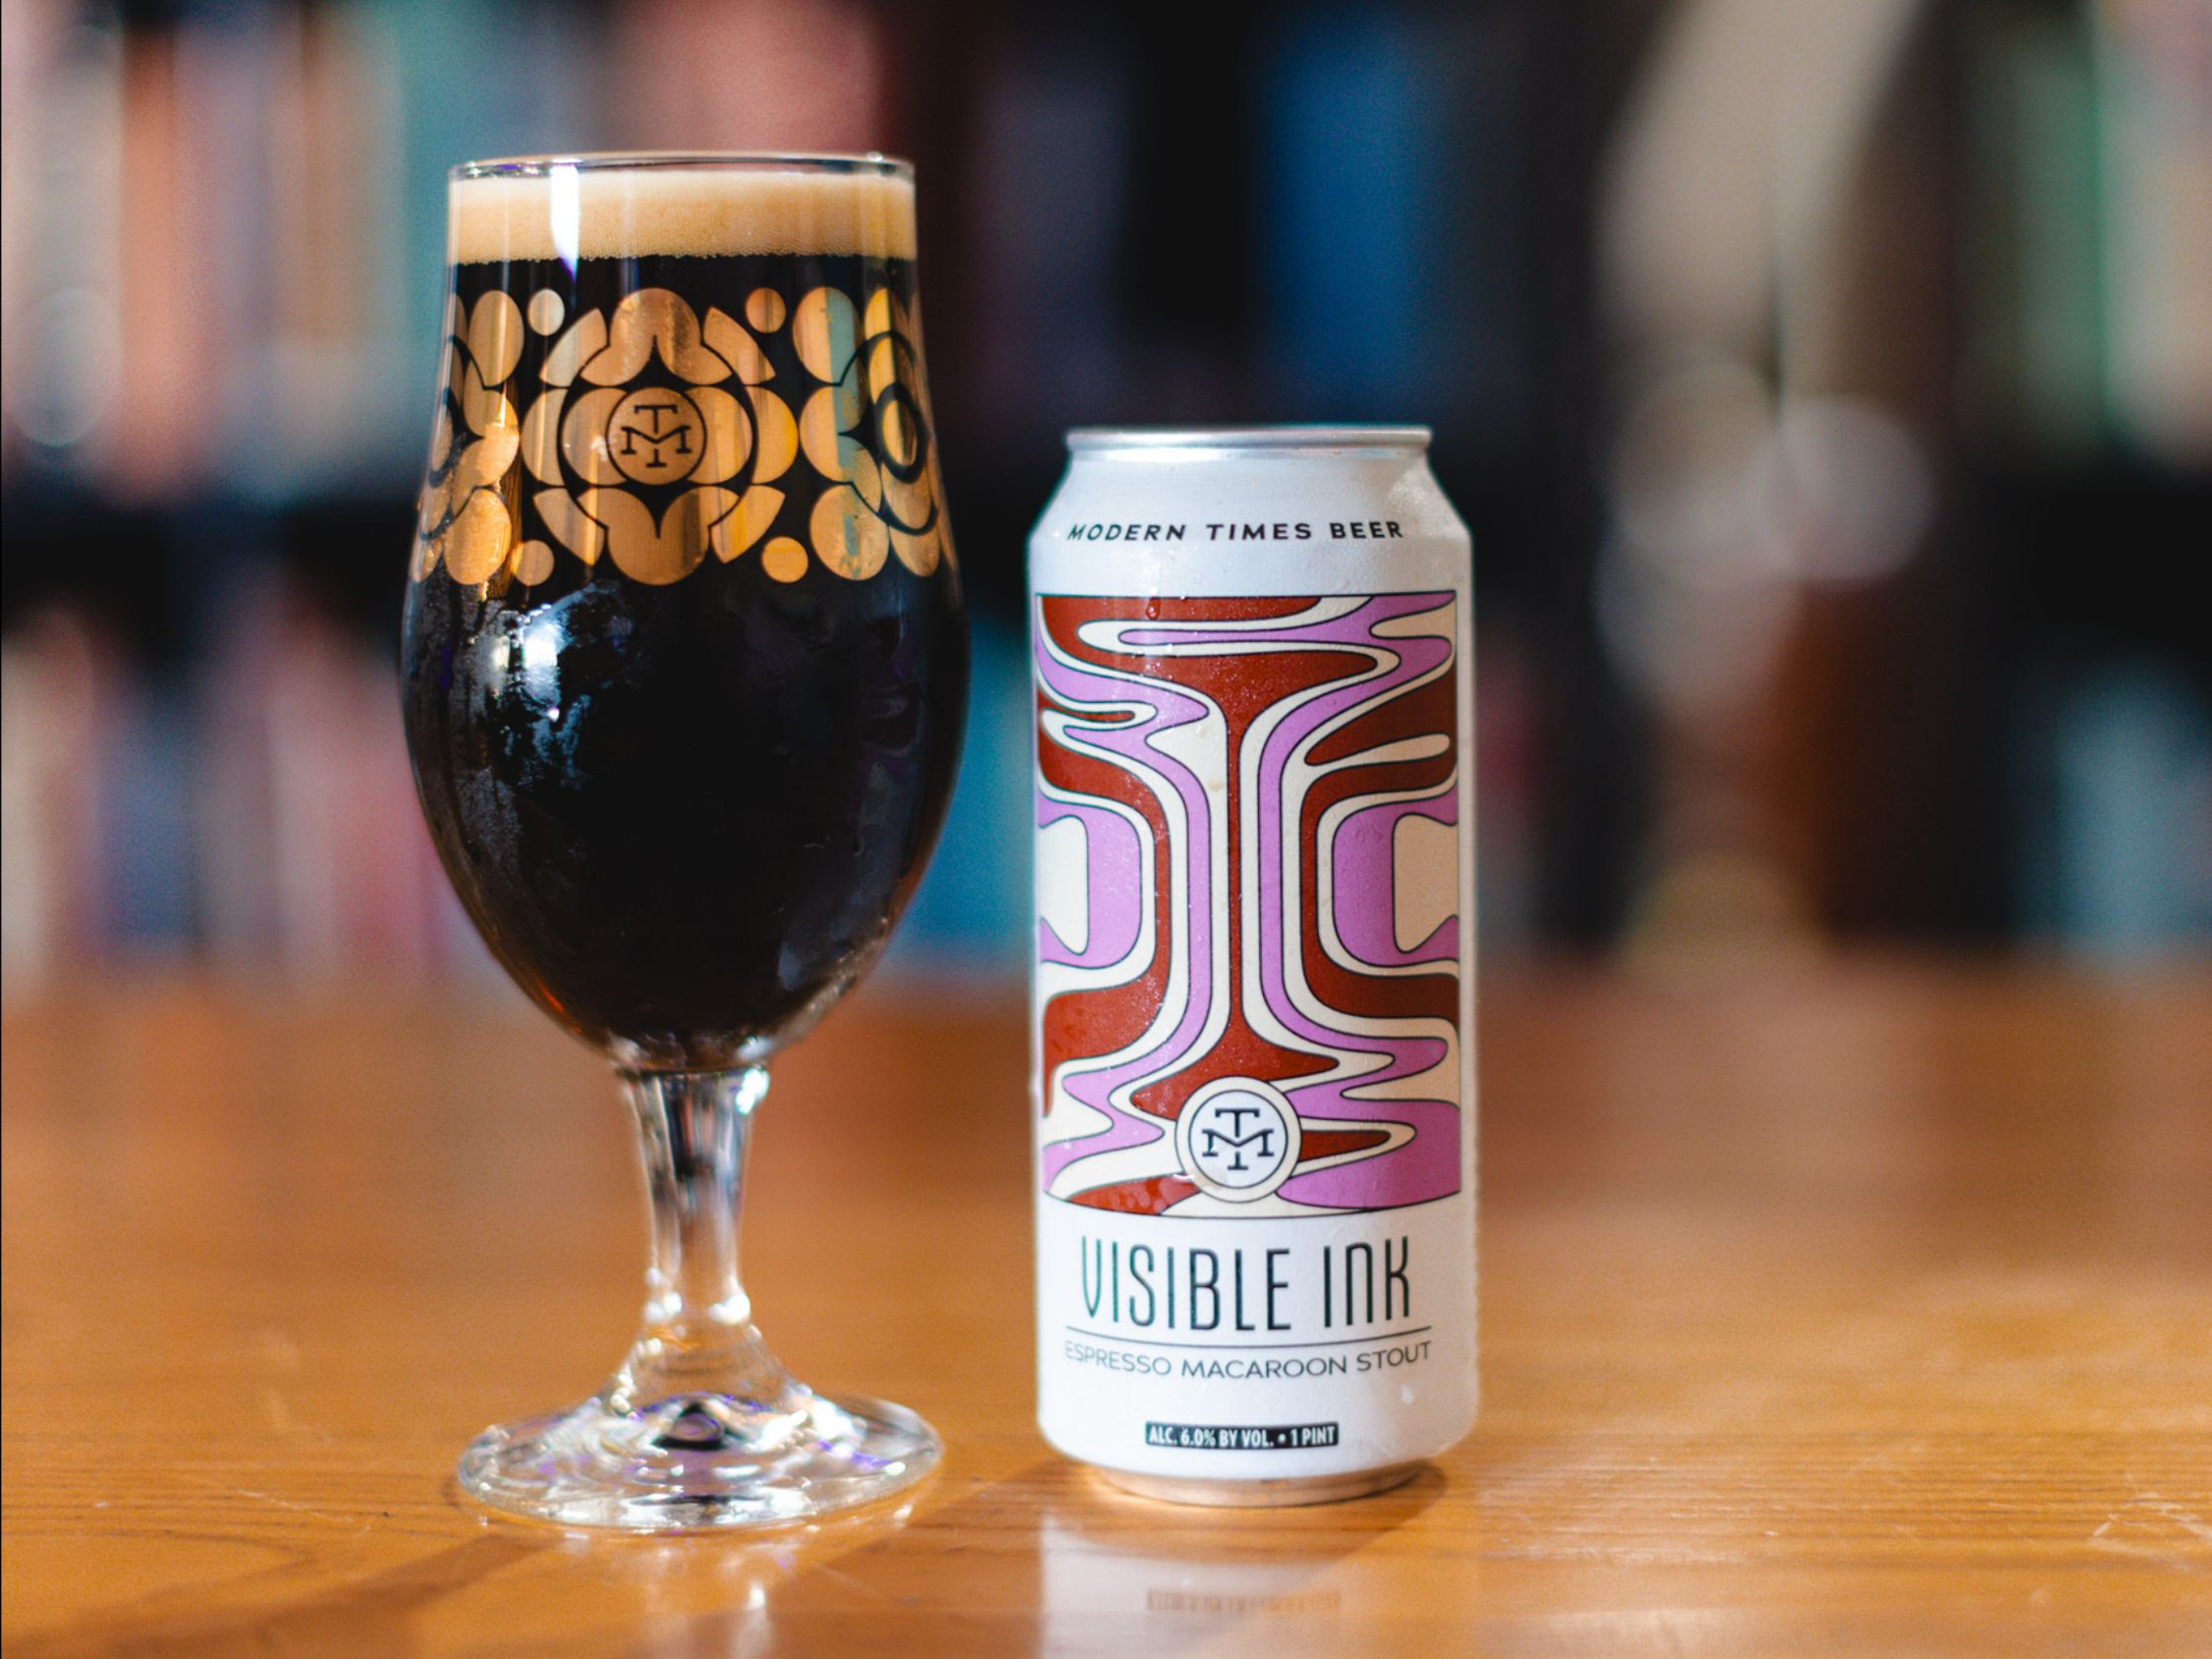 image of Visible Ink courtesy of Modern Times Beer